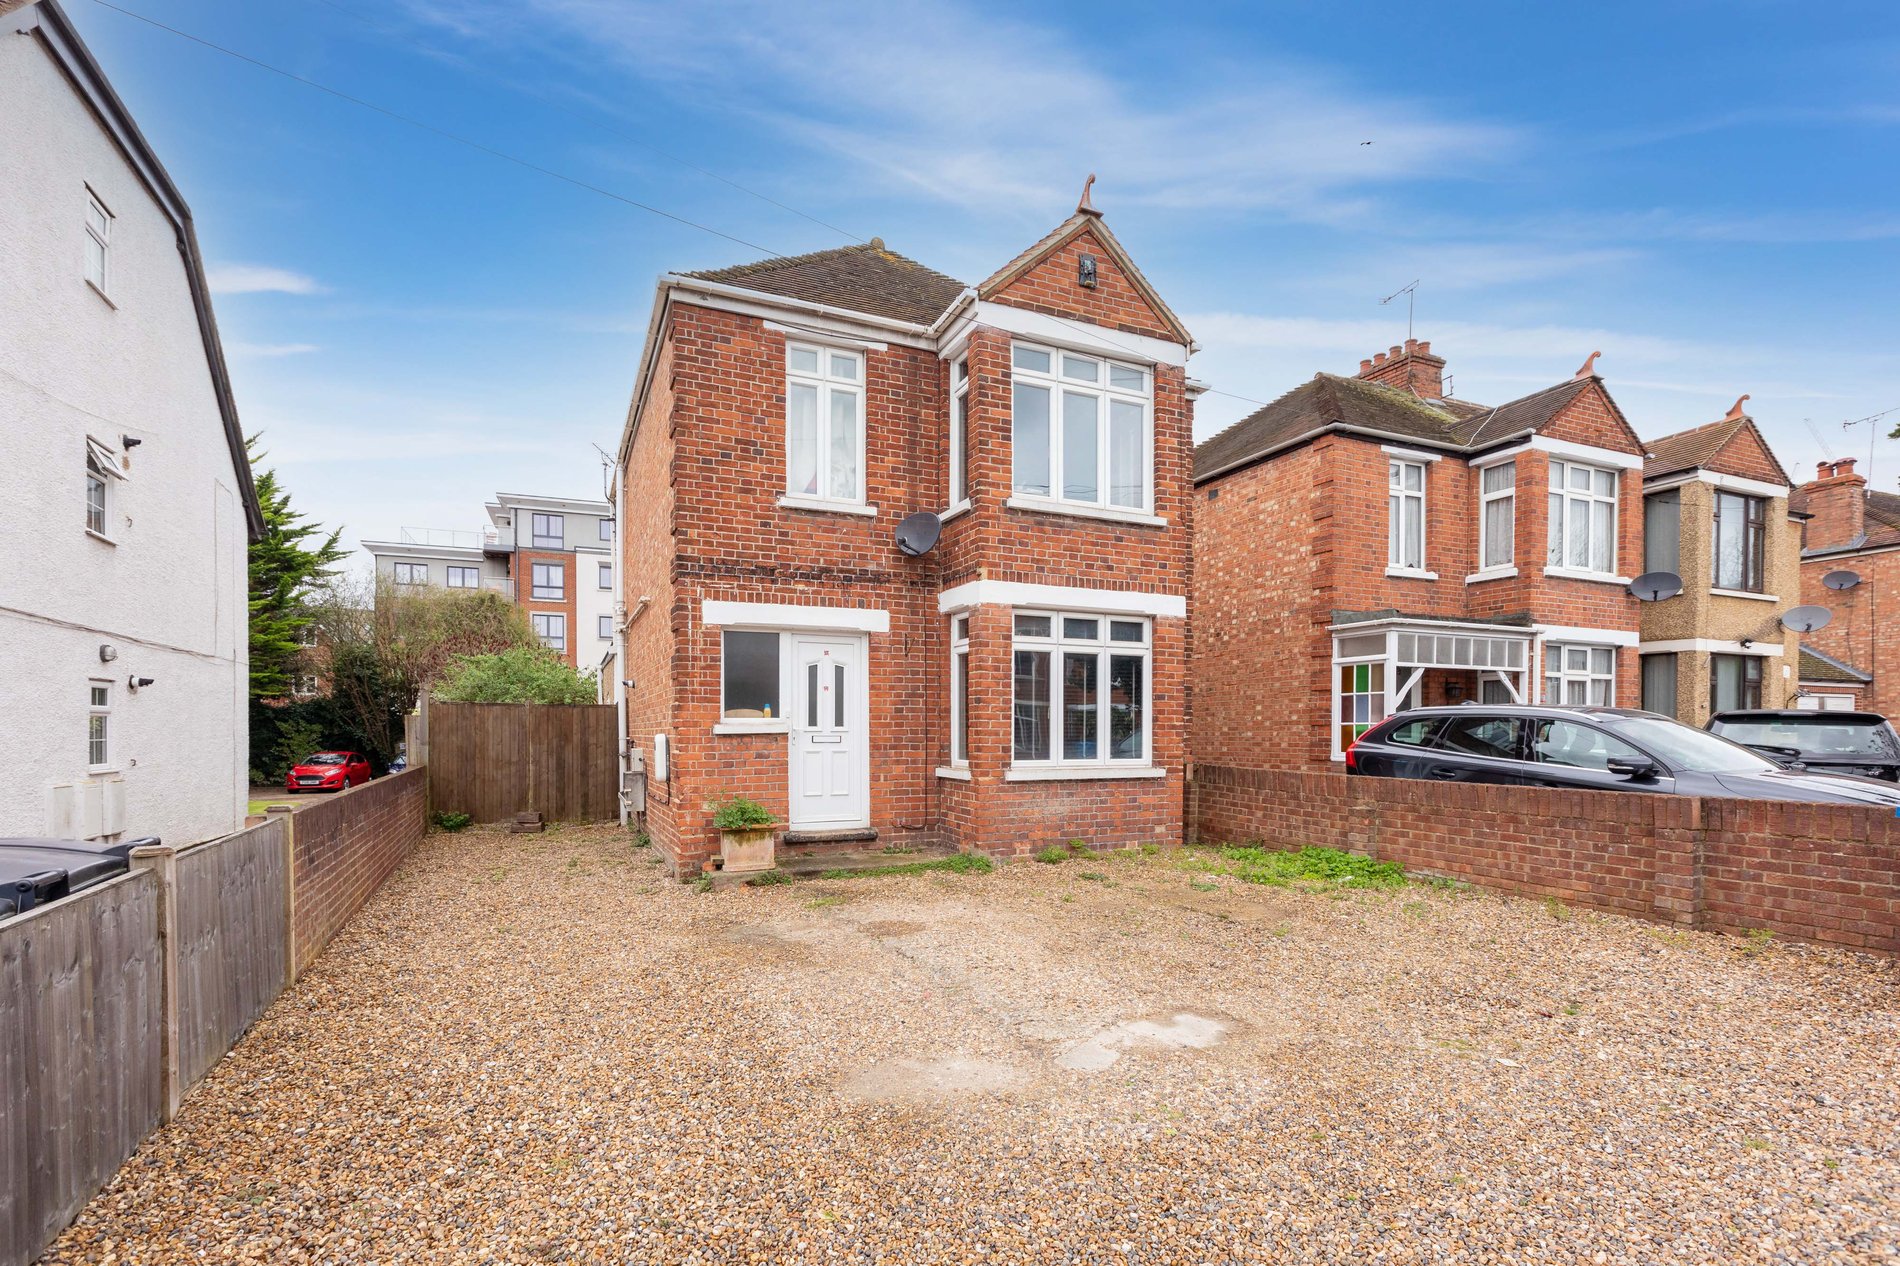 3 bed detached house for sale in Forlease Road, Maidenhead - Property Image 1